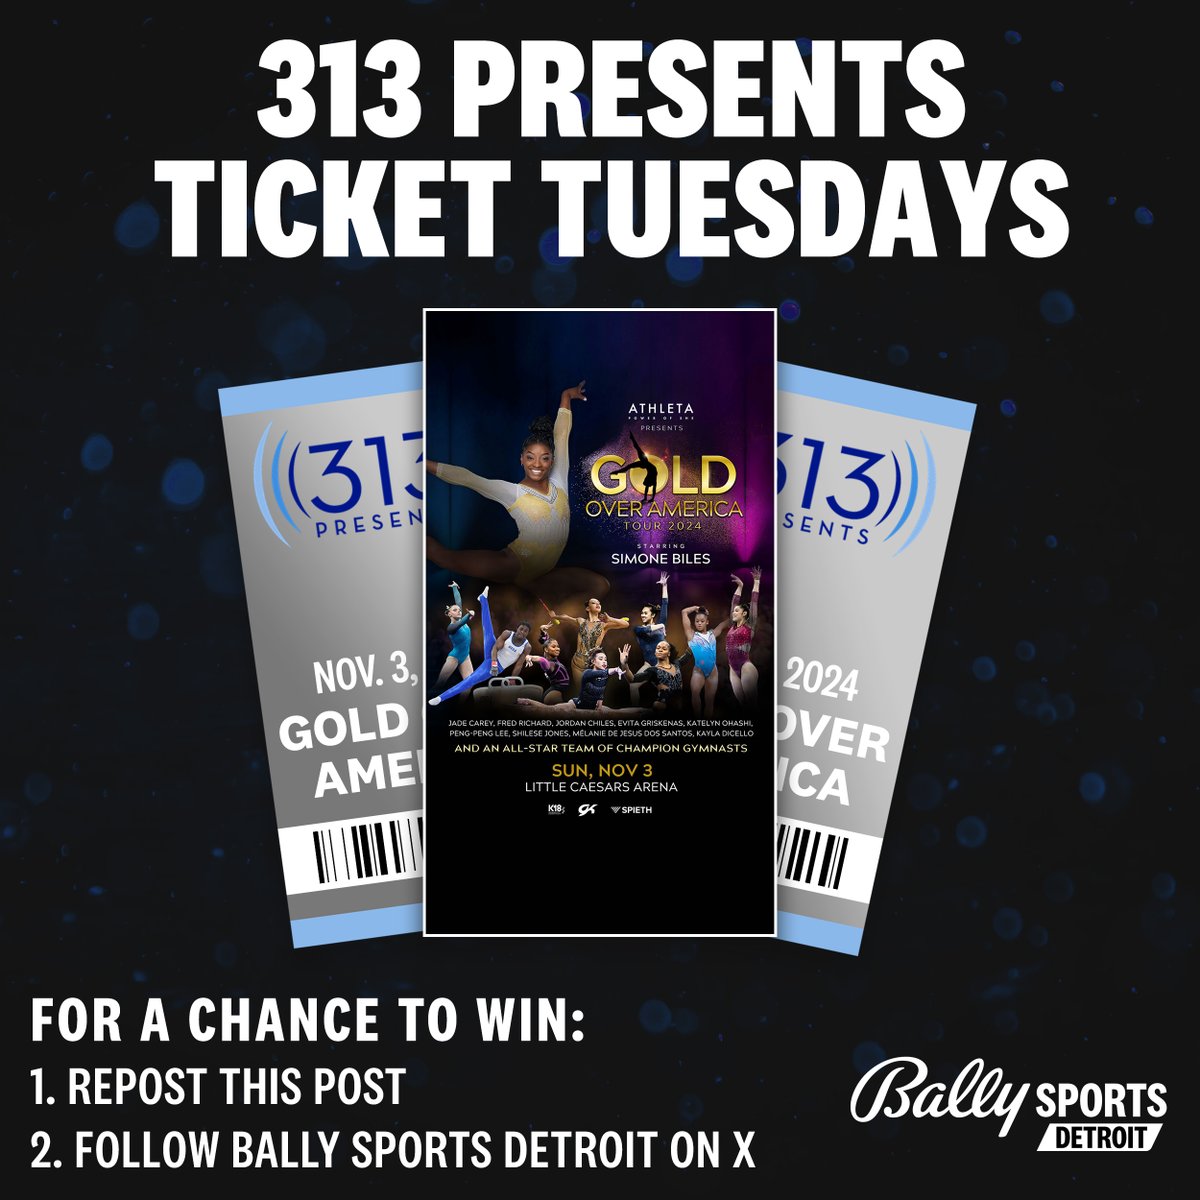 🎟️ 313 PRESENTS TICKET TUESDAYS 🎟️ Your chance to win tickets to an upcoming @313Presents event/concert! How to enter: ➖ Repost this post ➖ Follow @BallySportsDET No purchase necessary. MI and OH residents only. 18+. See full rules at bit.ly/313tickets.